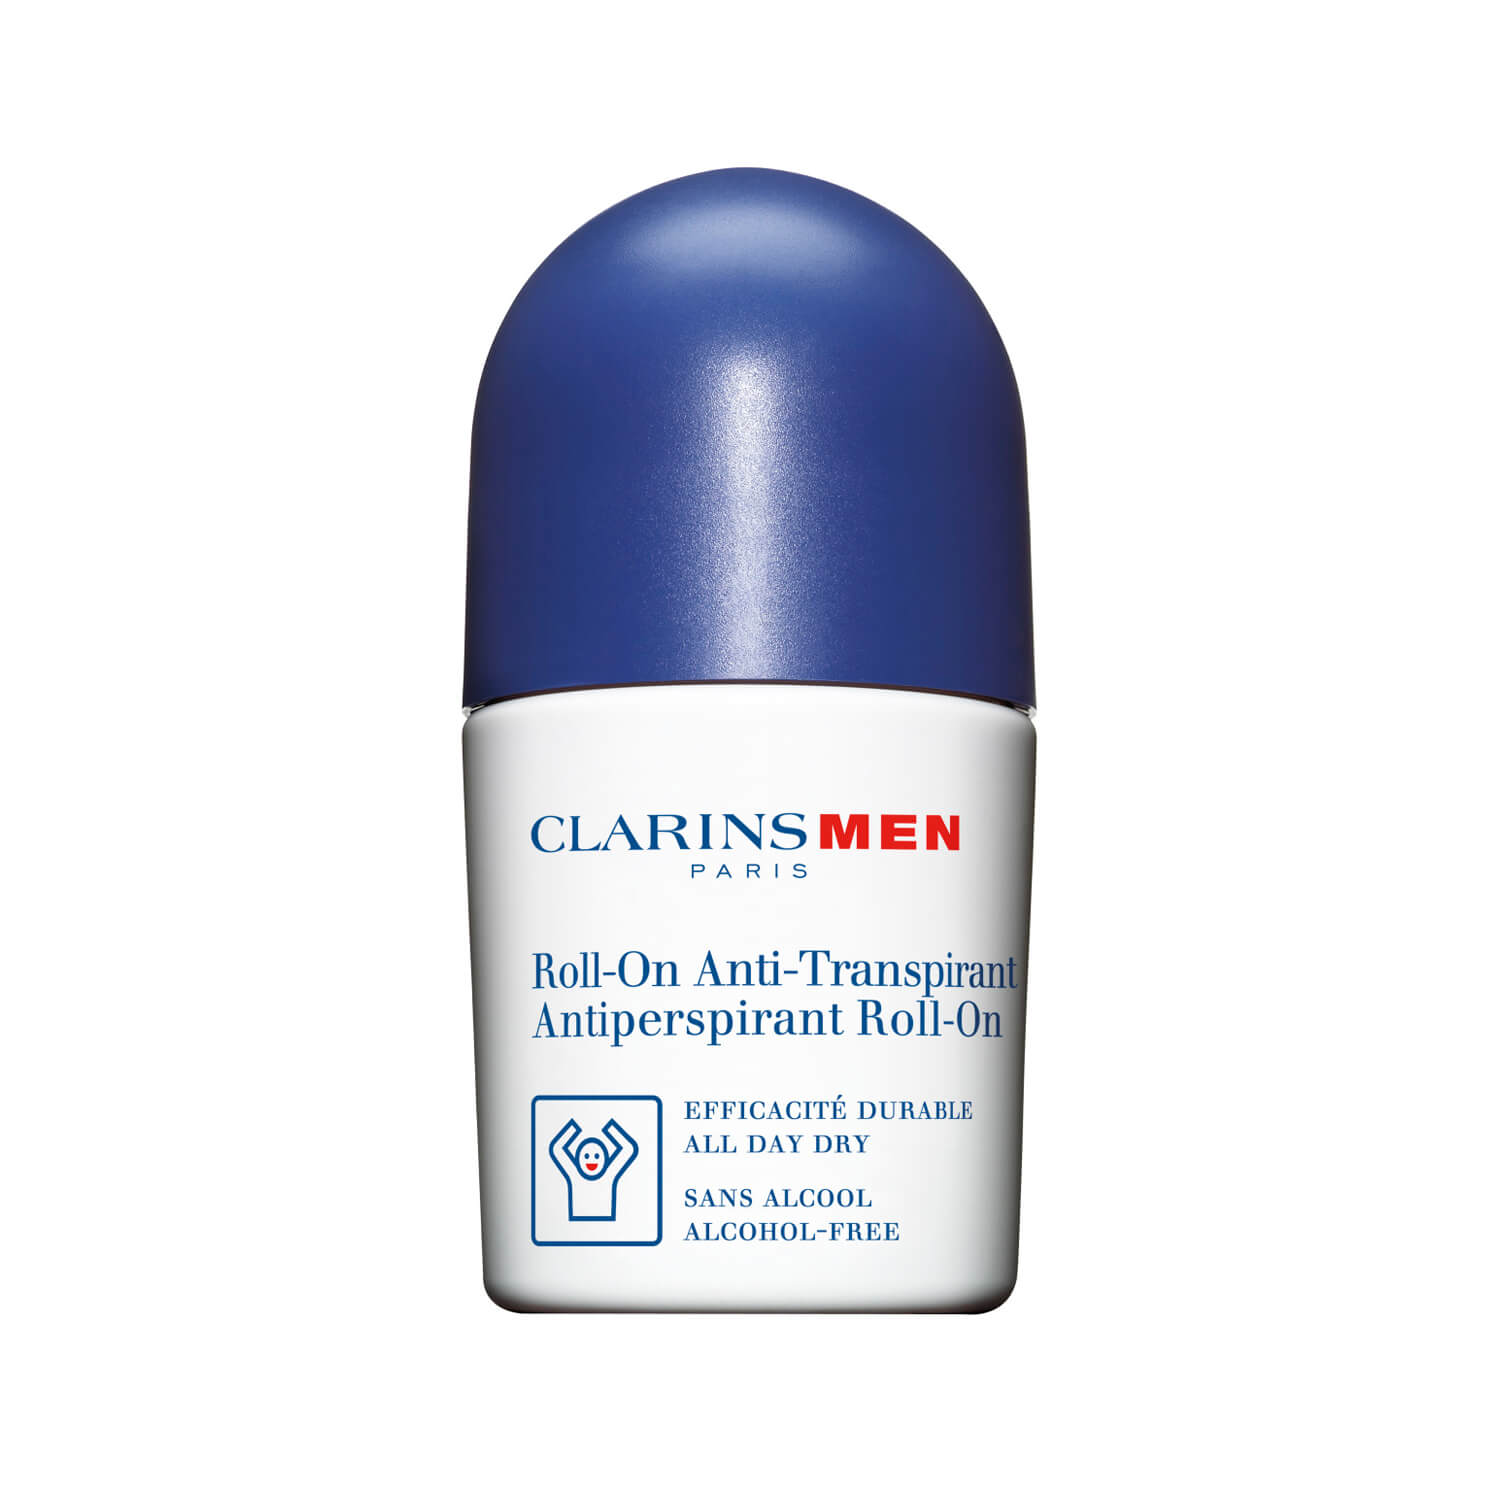 Clarins Men Antiperspirant Deo Roll-on 1 Shaws Department Stores